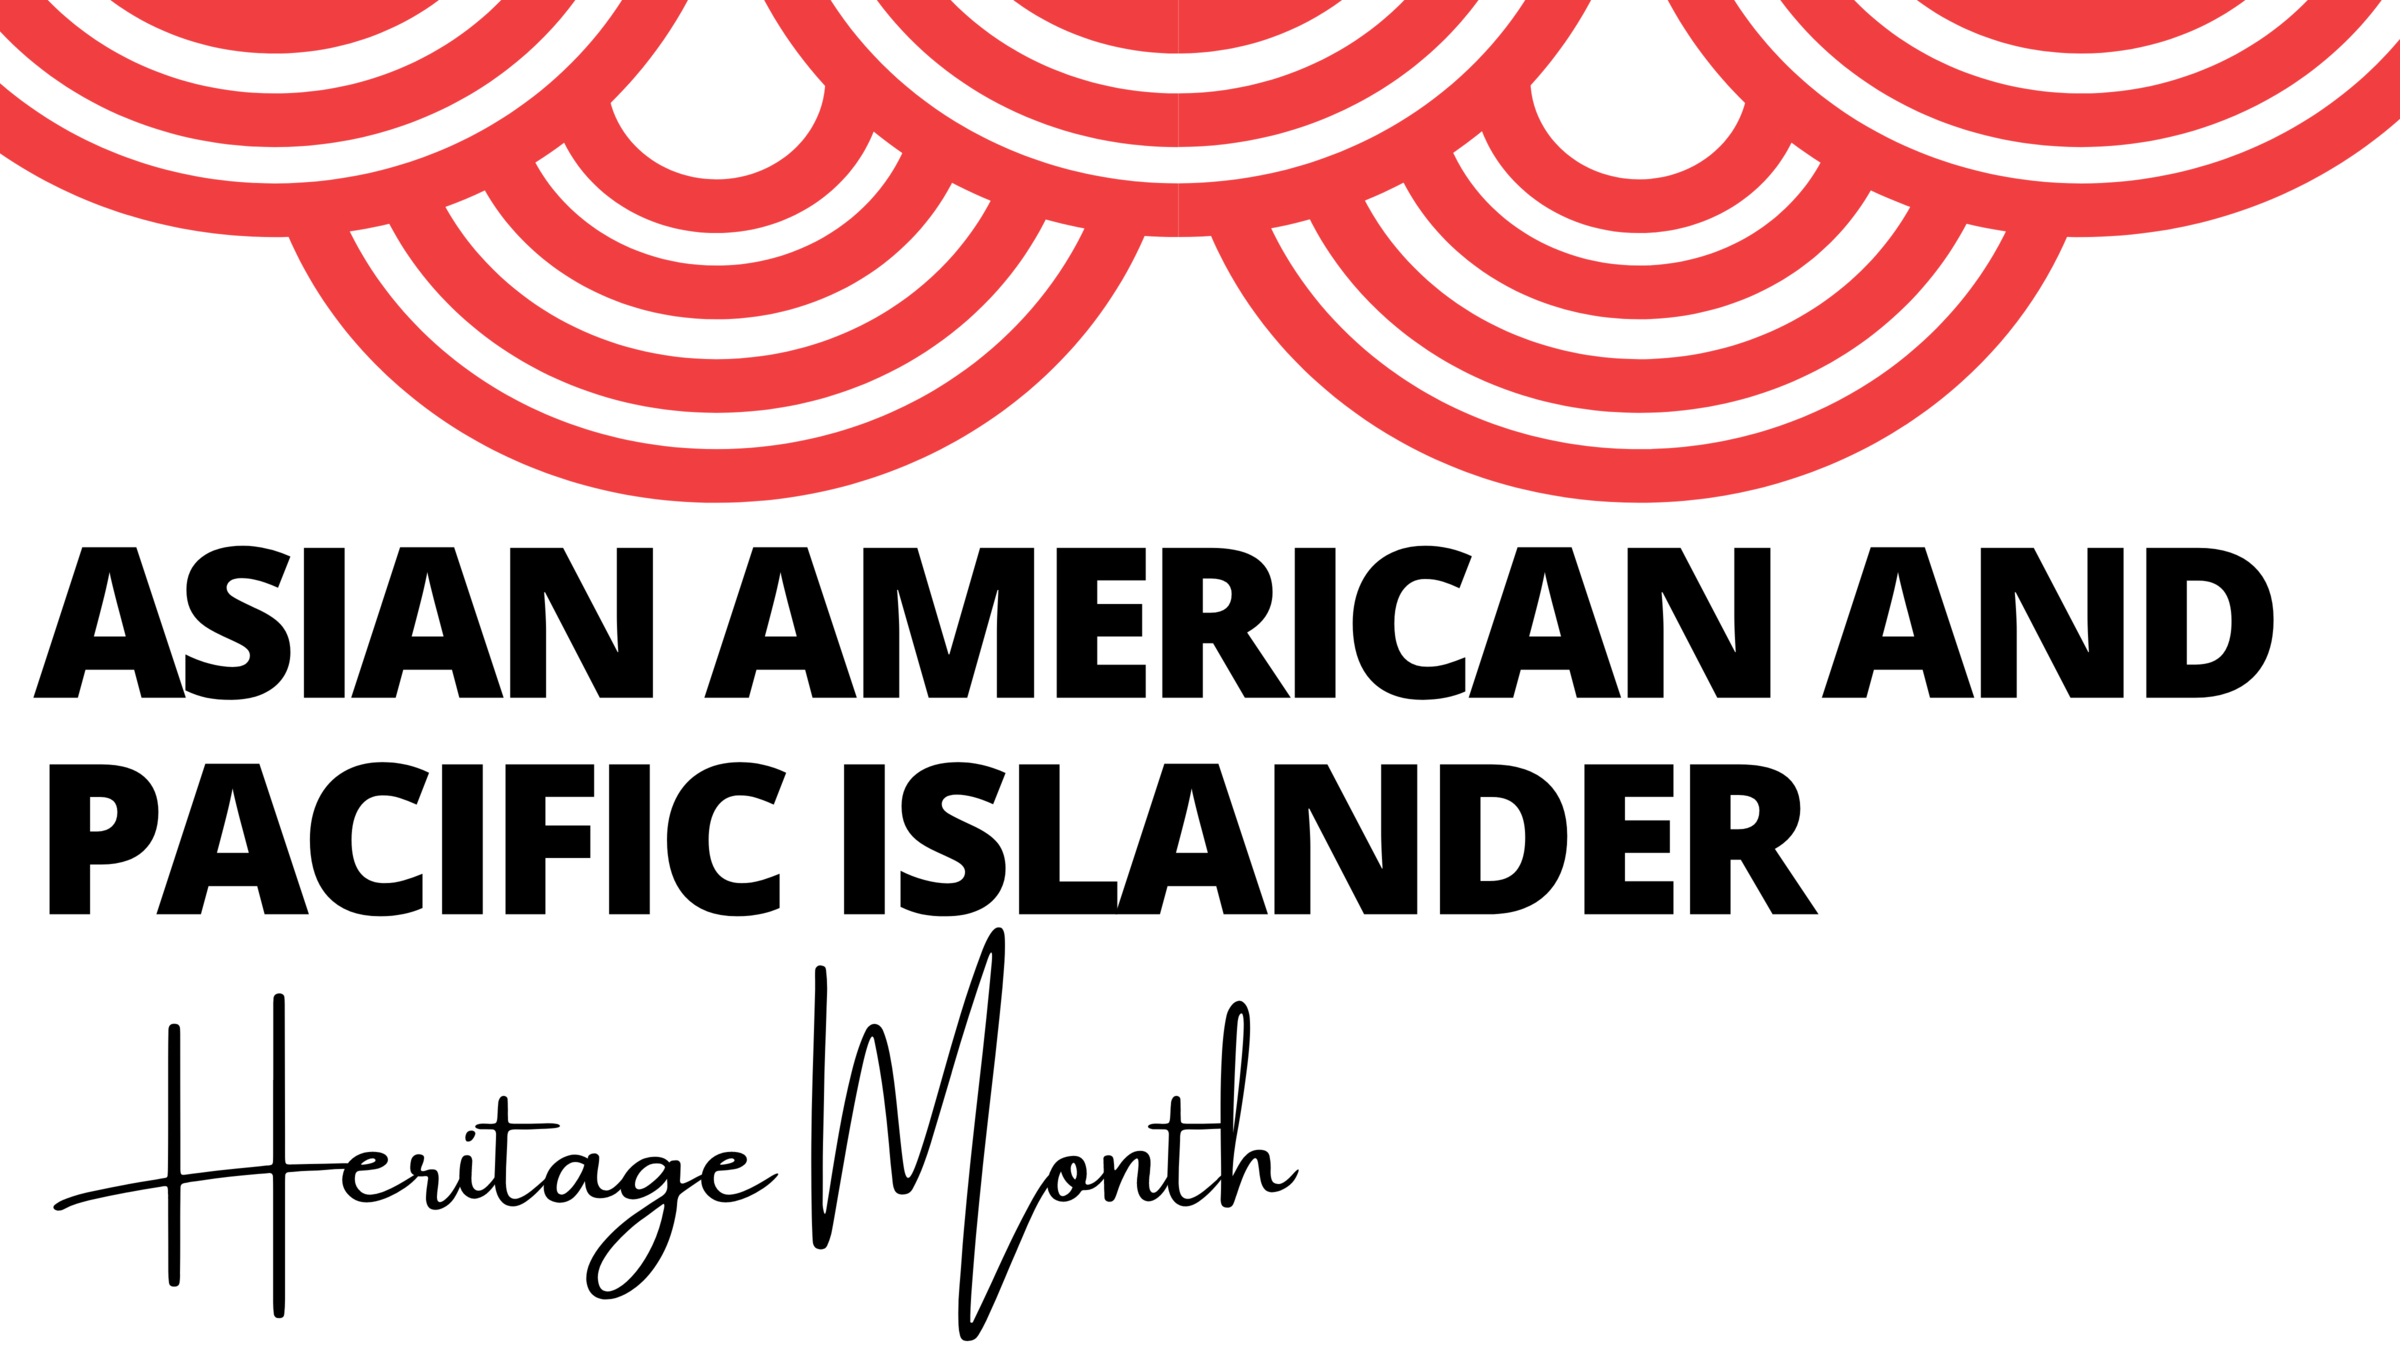 Logo reads "Asian American and Pacific Islander Heritage Month"